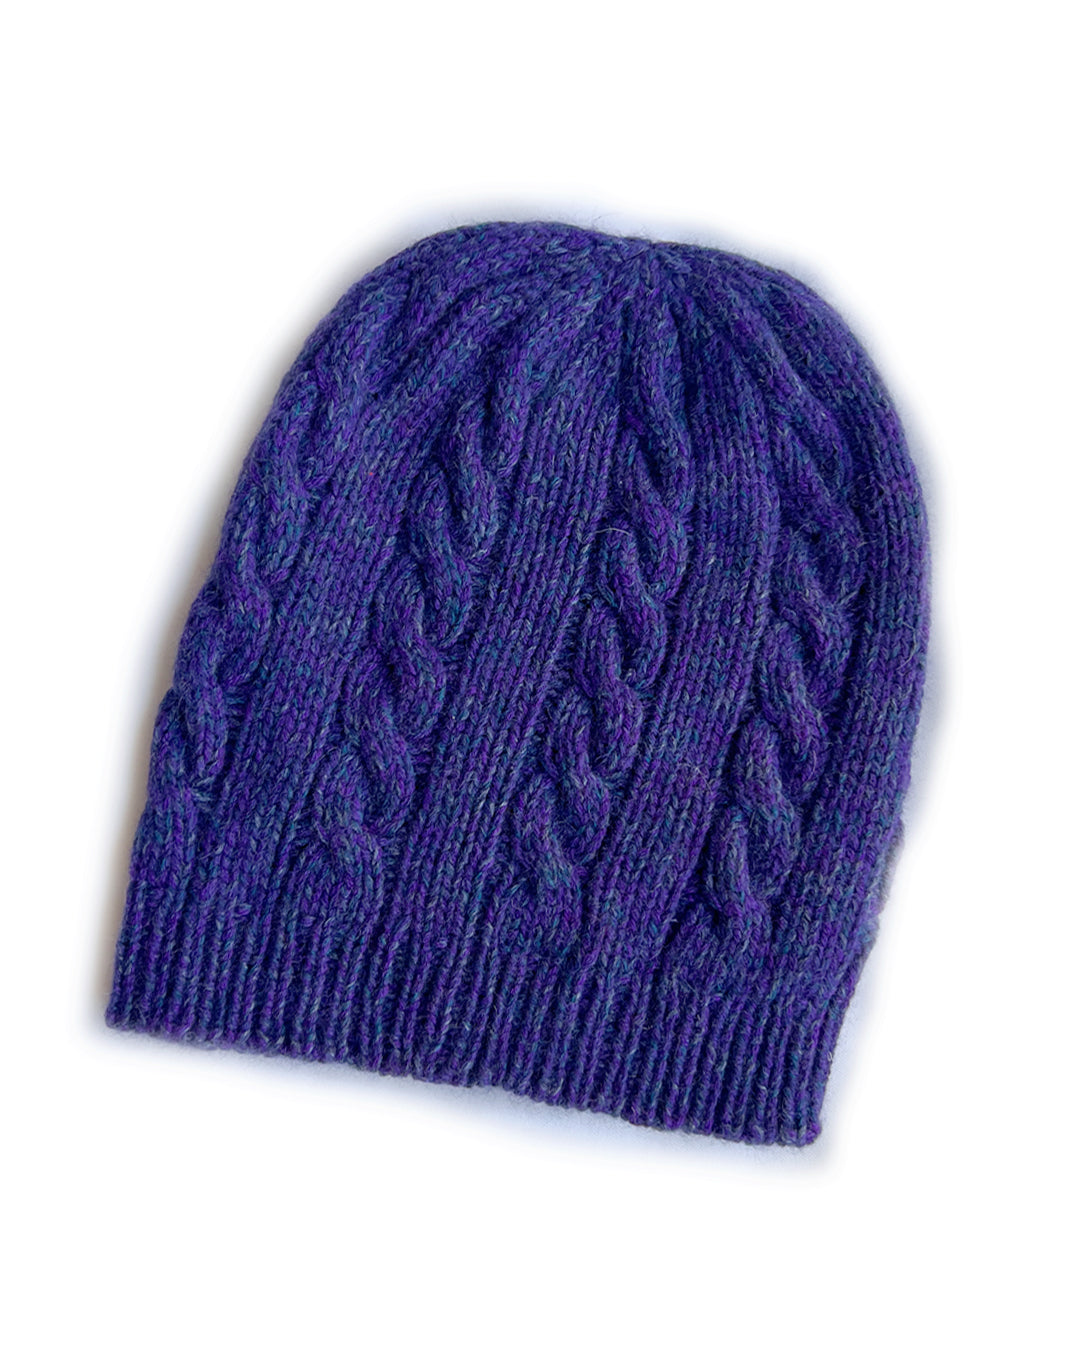 Violet Navy Blended Cable Knit Cashmere Beanie | cukimber designs